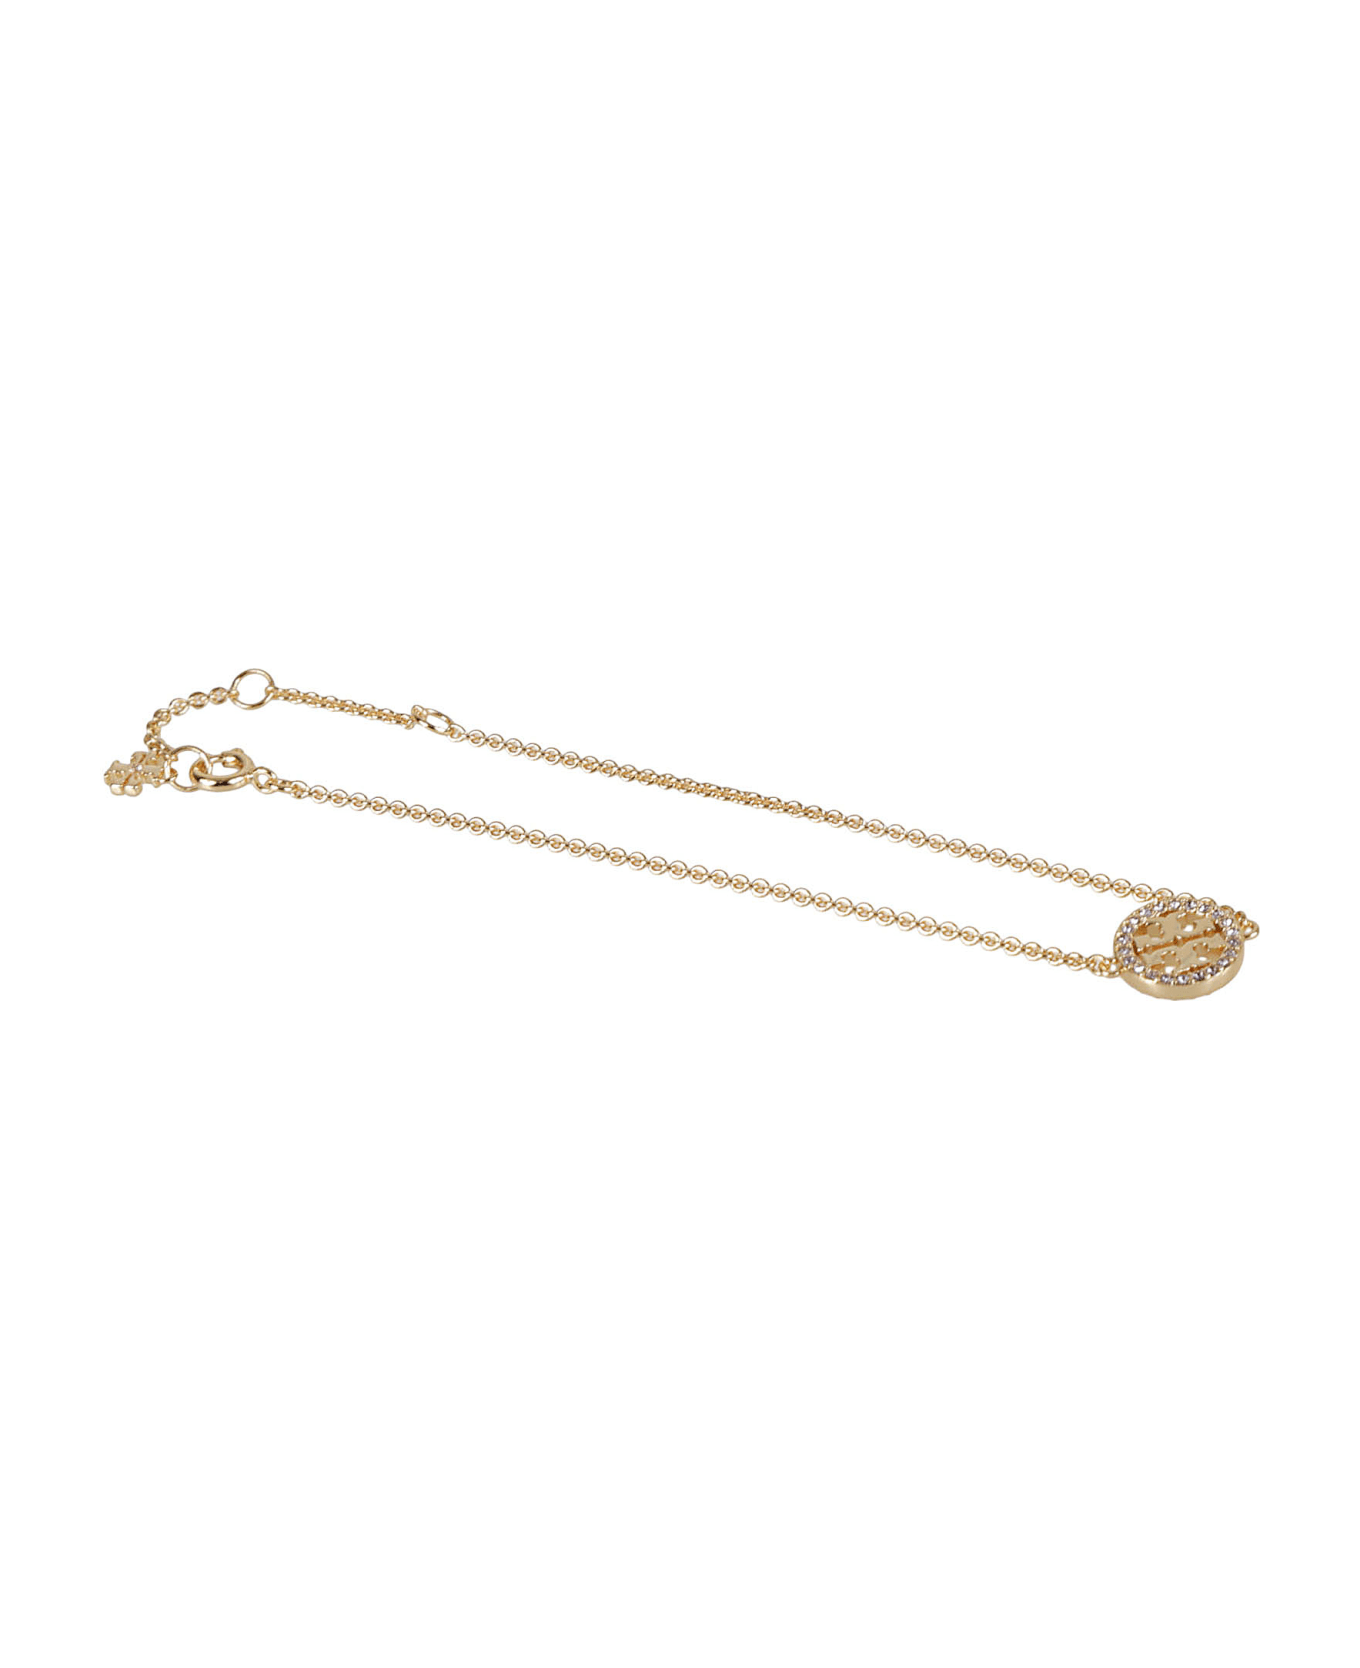 Tory Burch Miller Pave Pendant Necklace - Tory Gold/Purple